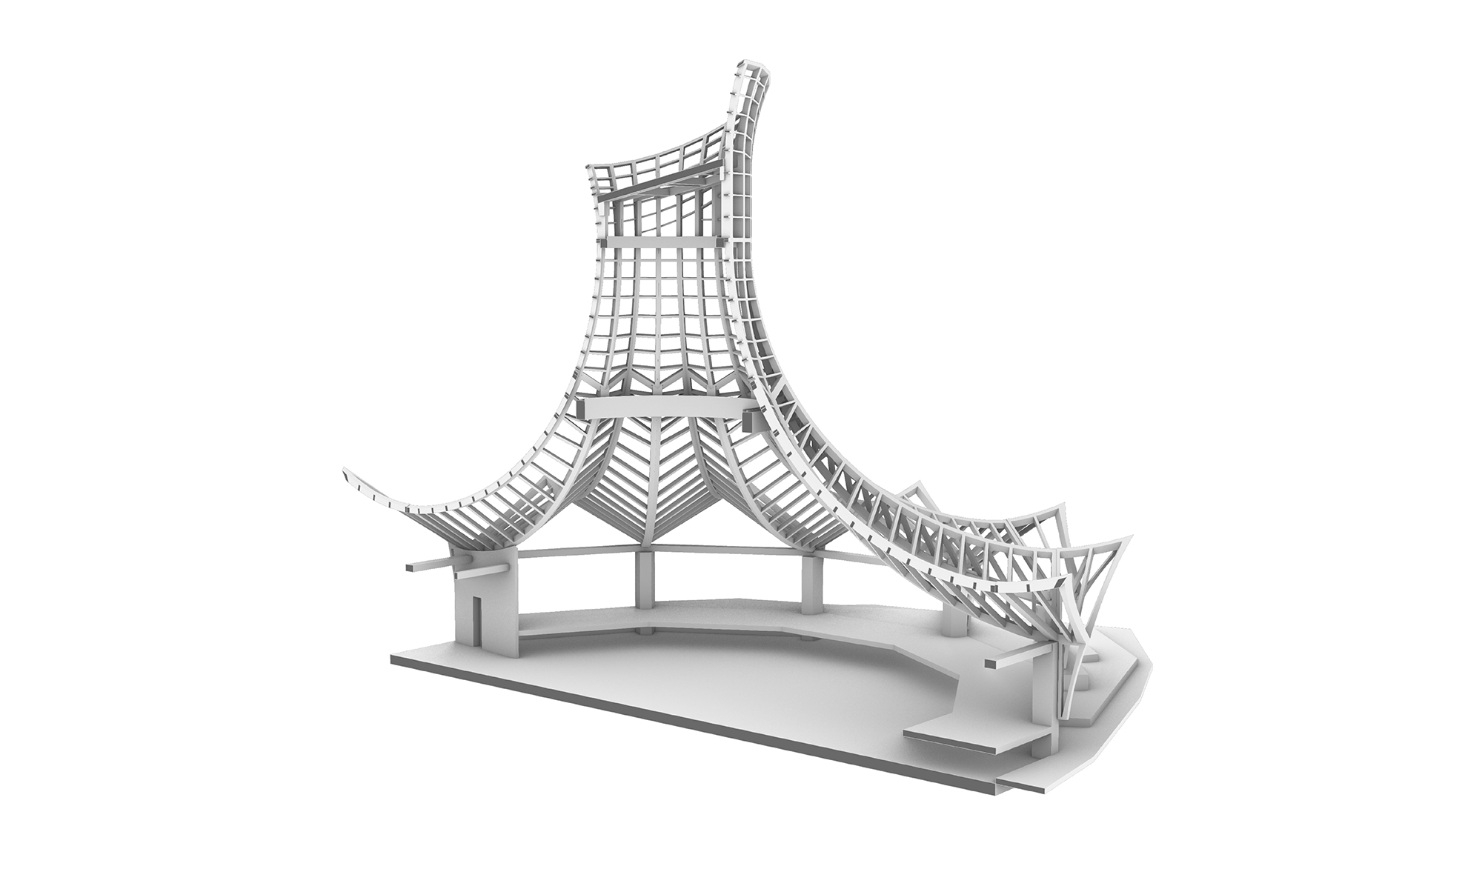 Detailed visualization of the timber support structure for the Knies Zauberhut